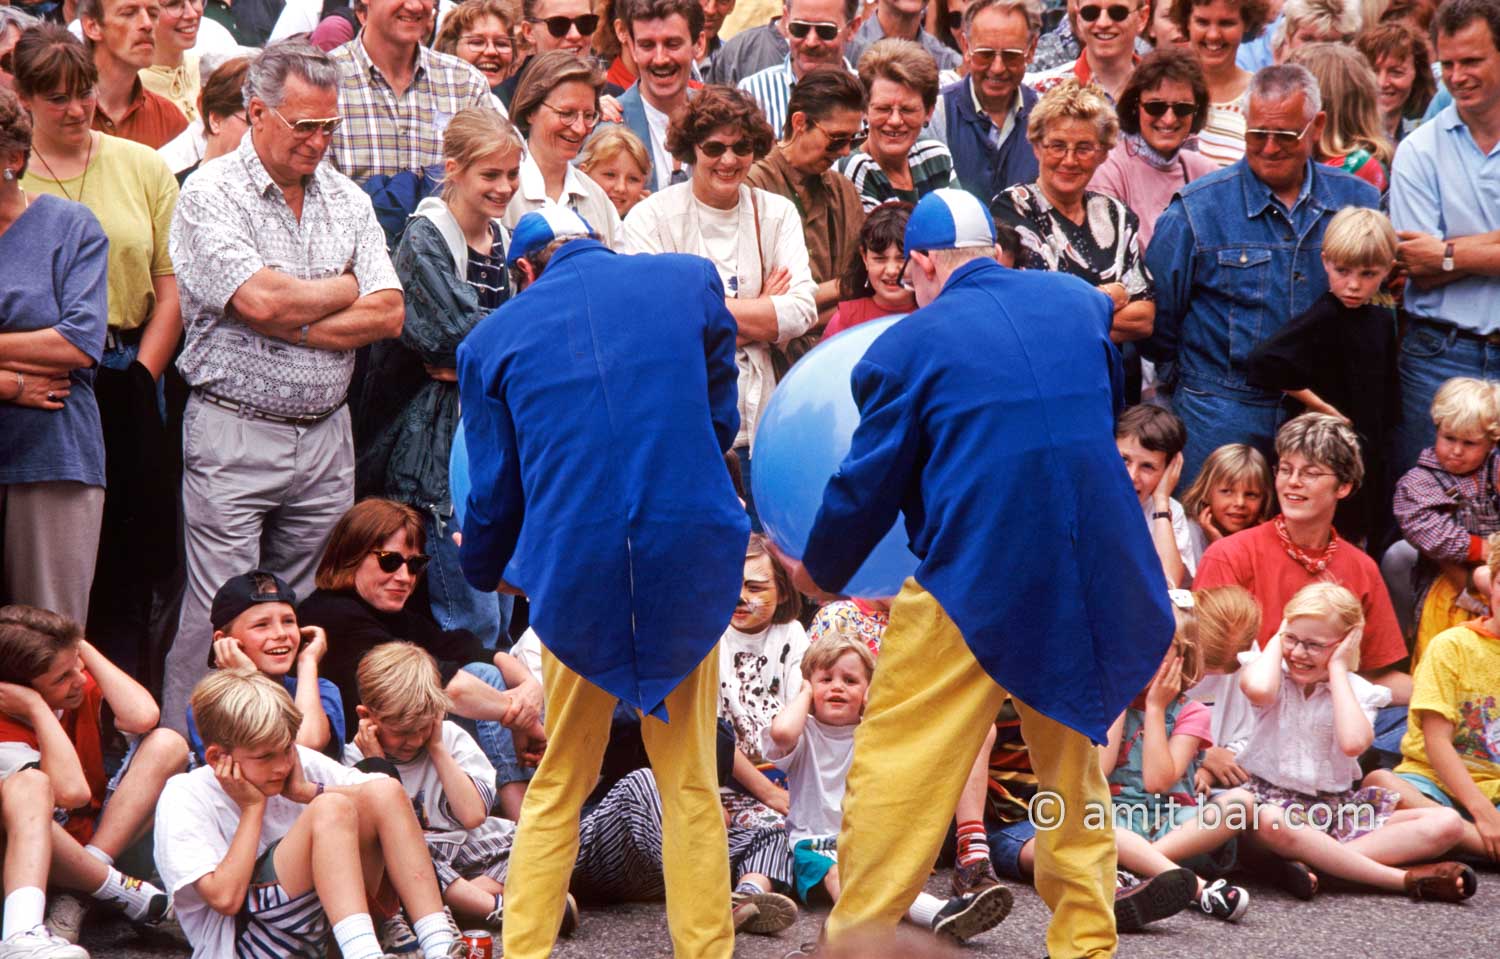 Be careful!: Two artist are blowing huge balloons on street theater show in Doetinchem, The Netherlands